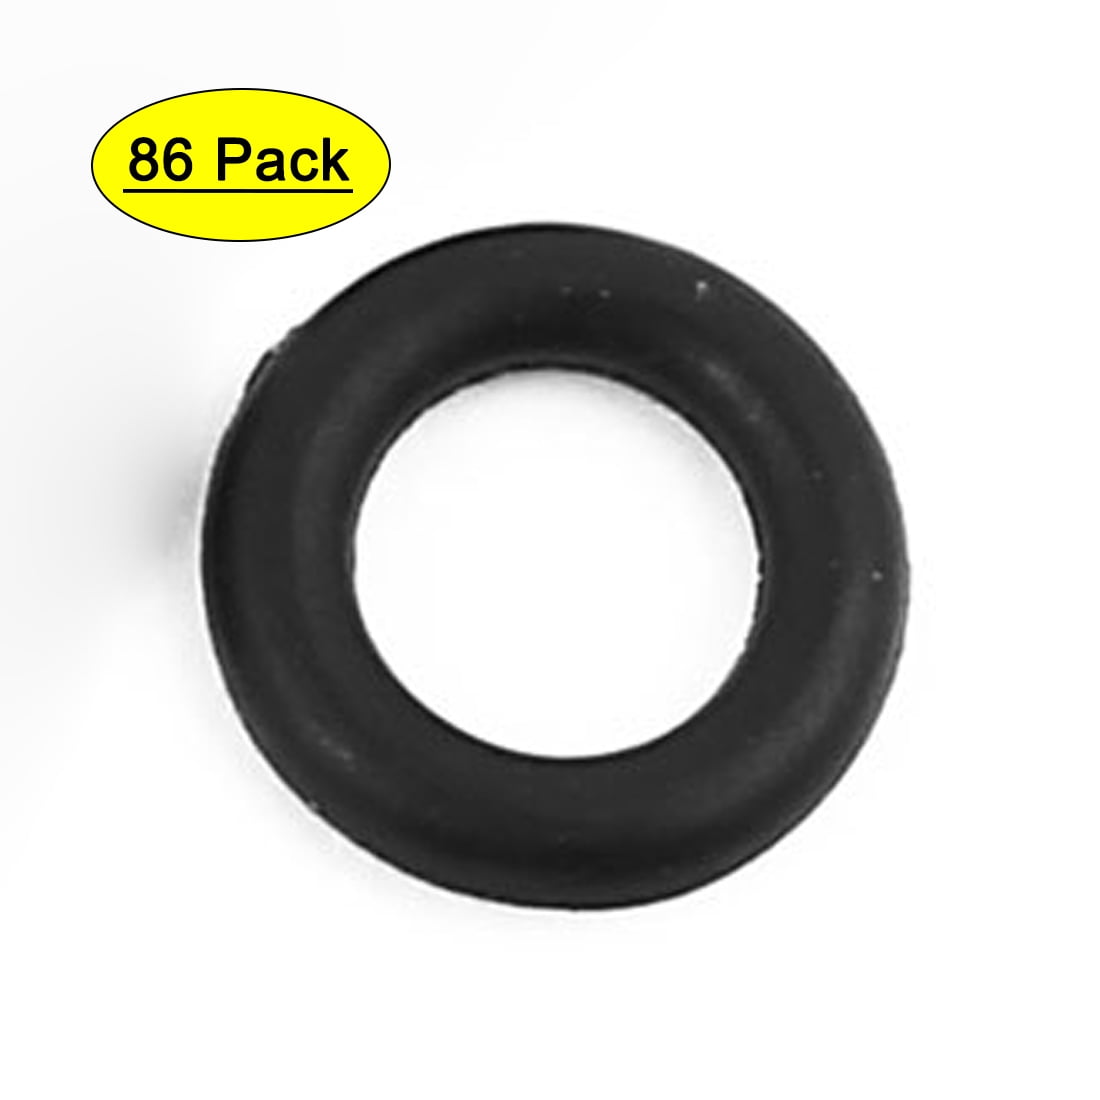 2 x Solid EPDM Rubber Discs pick your own size 2mm thick 